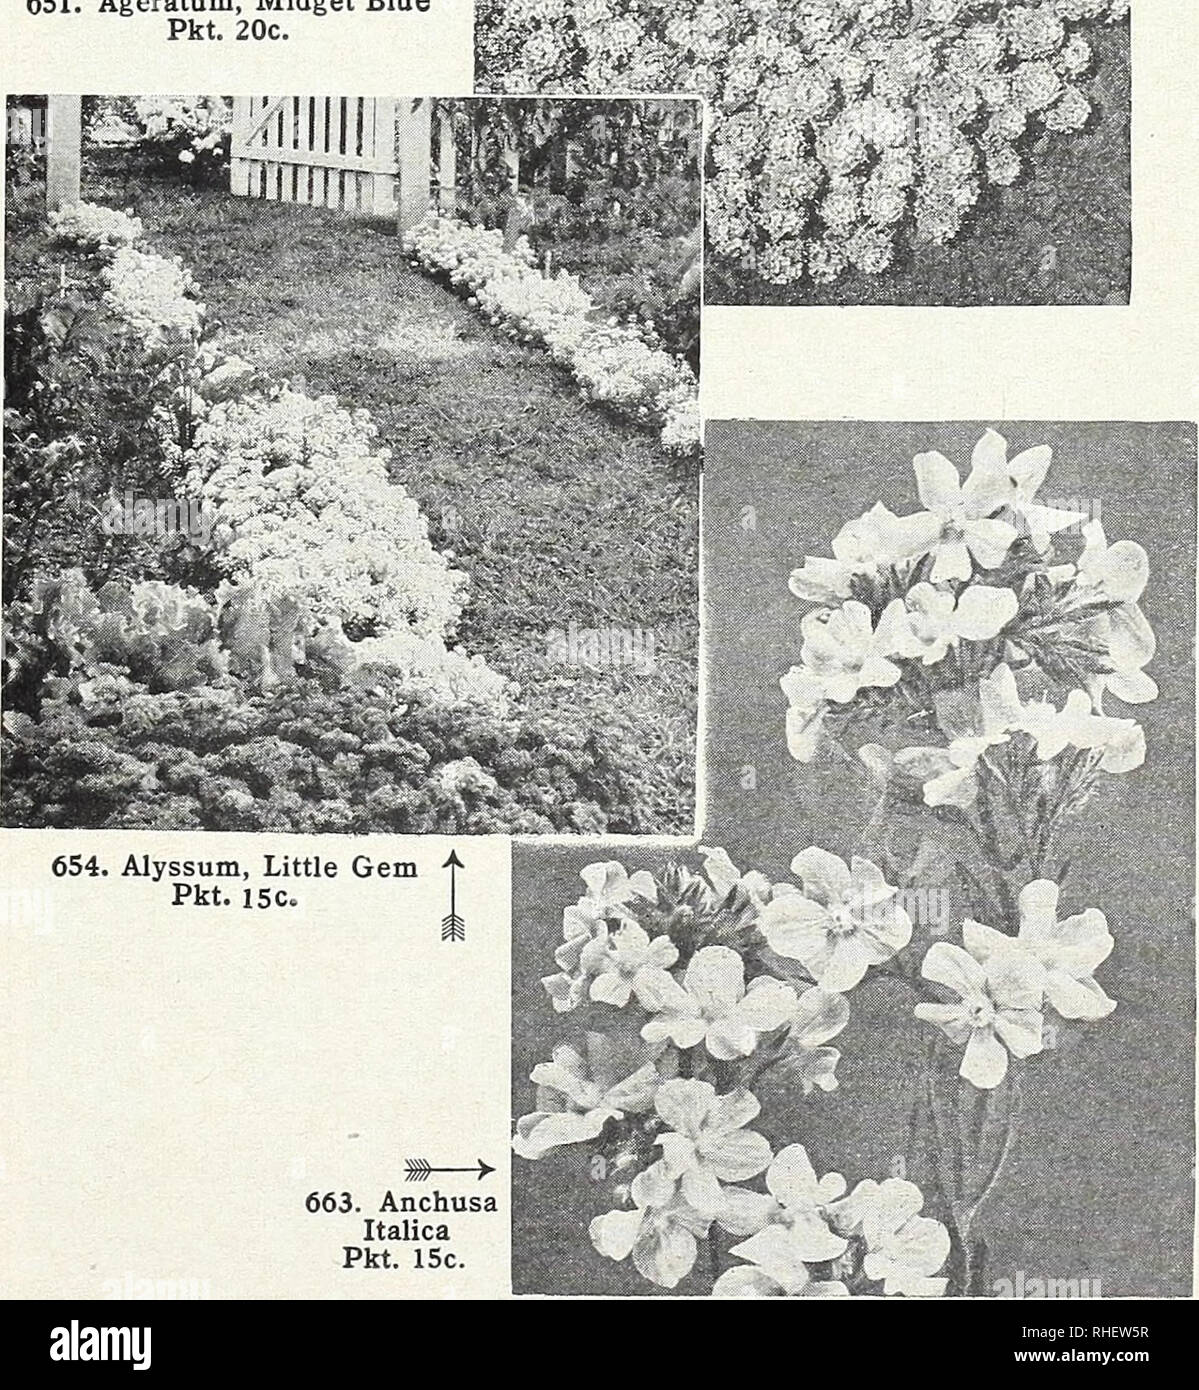 . Bolgiano's capitol city seeds : 1960. Nurseries (Horticulture) Catalogs; Bulbs (Plants) Catalogs; Vegetables Catalogs; Garden tools Catalogs; Seeds Catalogs. Ageratum, Midget Blue « Pkt. 20c. ffiiif.*''?,. 663. Anchusa Italica Pkt. 15c. FLOWERS FOR SHADED AND PARTIALLY SHADED LOCATIONS Alyssum Anchusa Balsam Begonias Columbine Annuals and Biennials Calliopsis Canterbury Bells Centaurea (Cornflower) Clarkia Godetia Linaria Lobelia Nasturtium Nicotiana Vinca (Periwinkle) ALL PRICES ARE SUBJECT TO MARKET CHANGES Perennials Available in plants only. See pages 33 through 35 Anchusa myosotidiflora Stock Photo